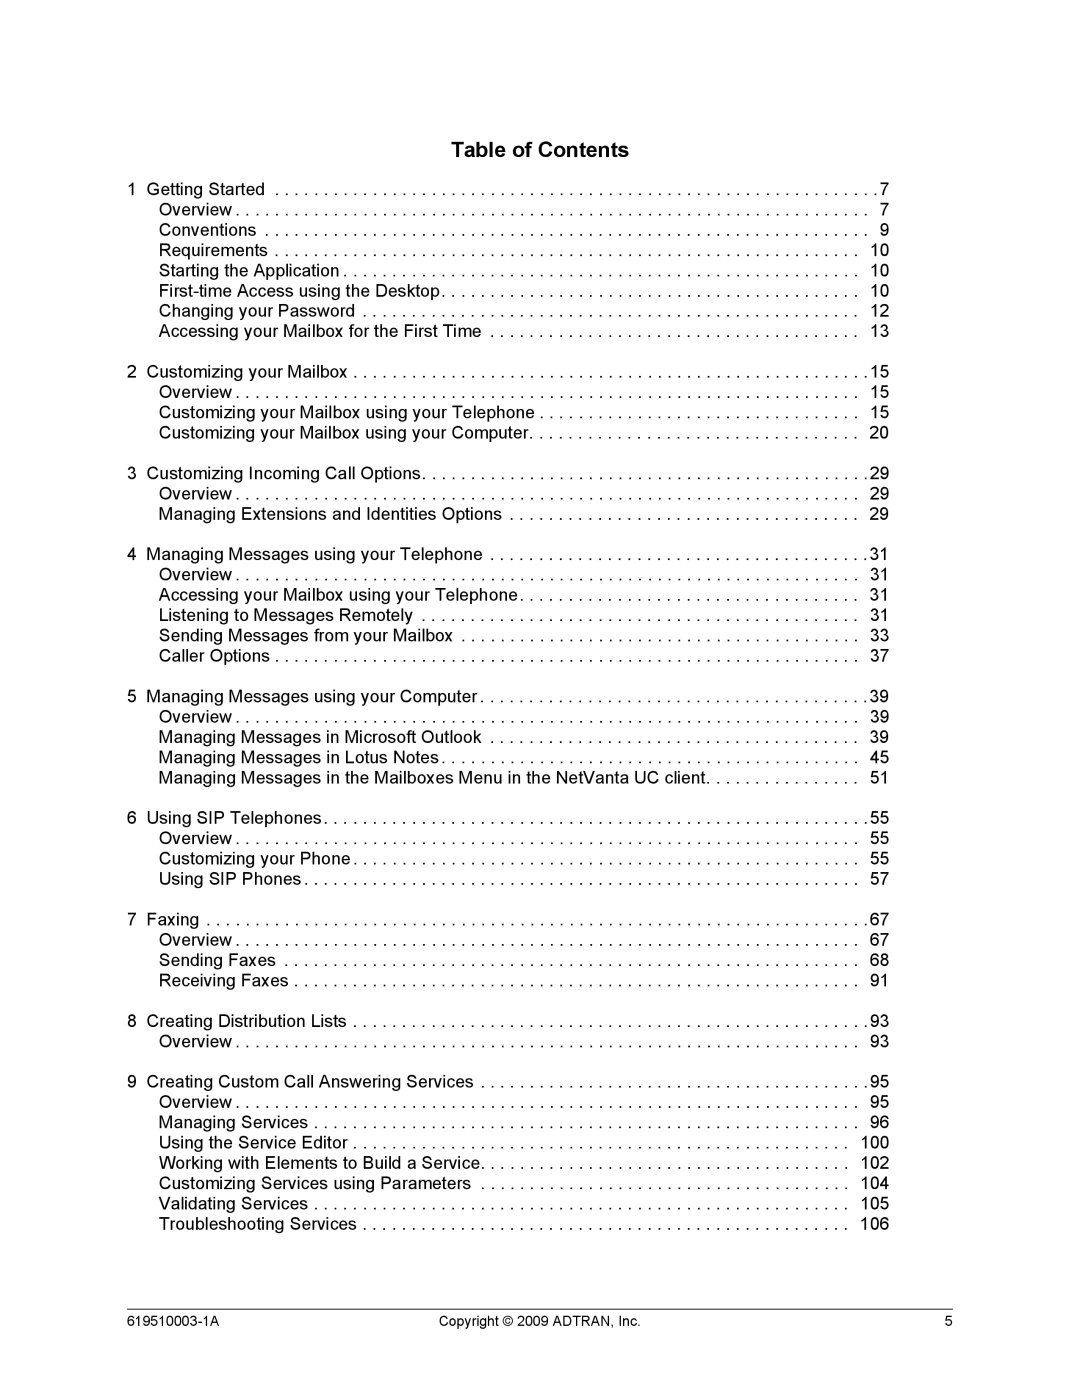 ADTRAN 619510003-1A manual Table of Contents, Customizing Incoming Call Options Overview 